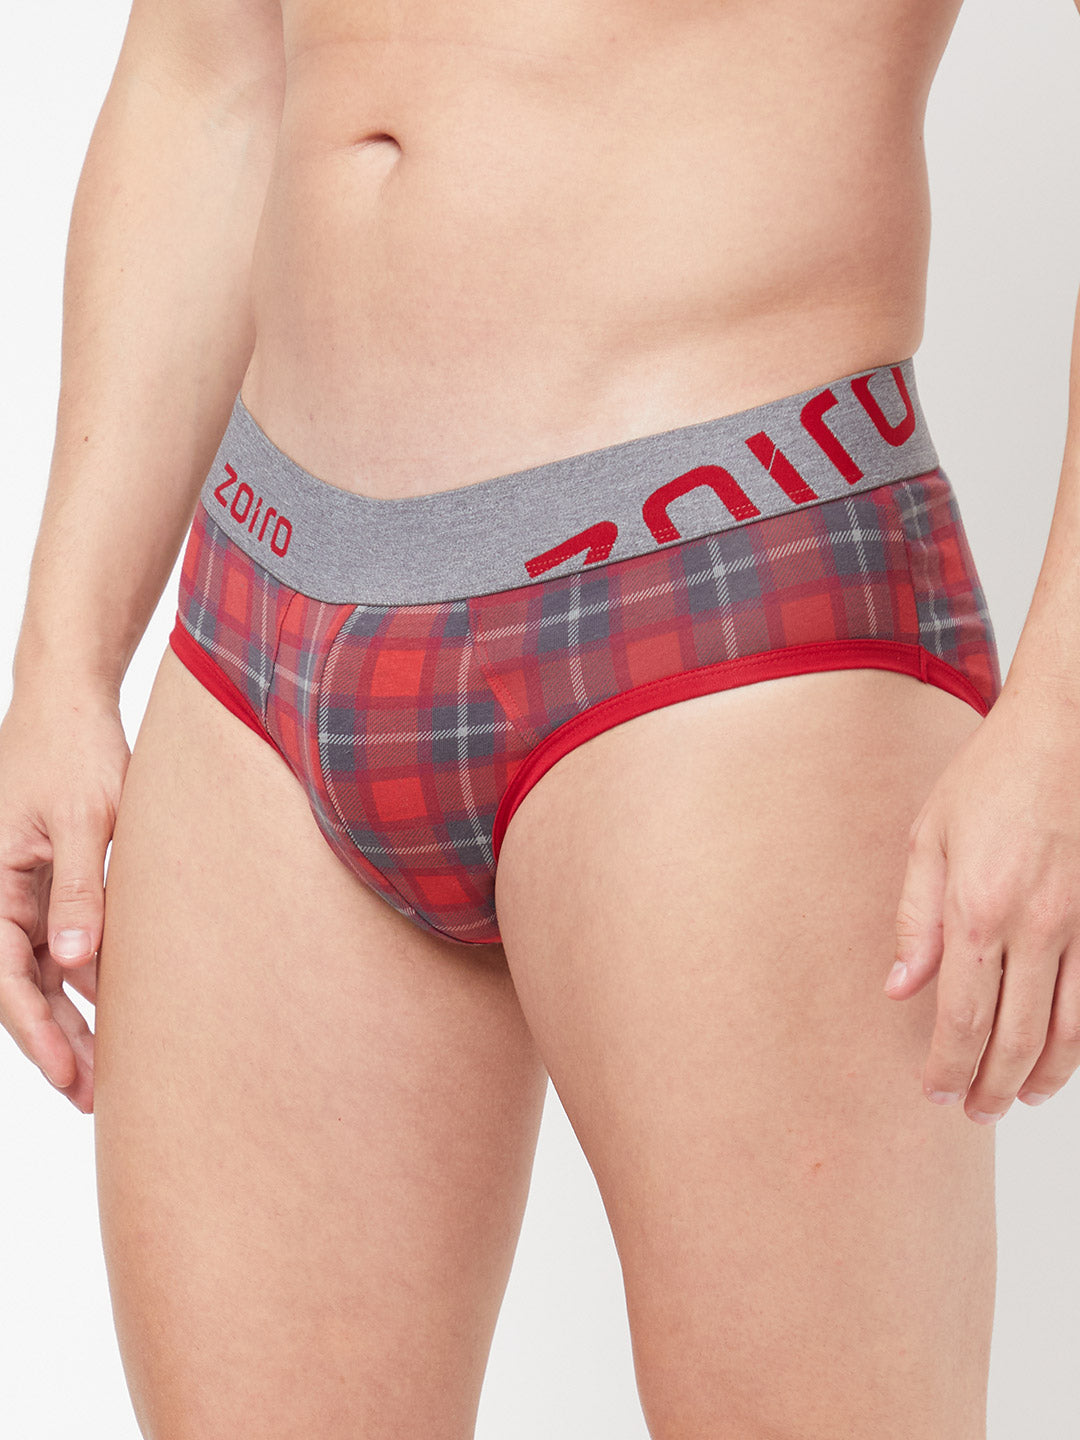 Zoiro Men&#39;s Cotton Printed Brief (Pack 2)- Total Eclipse + Red